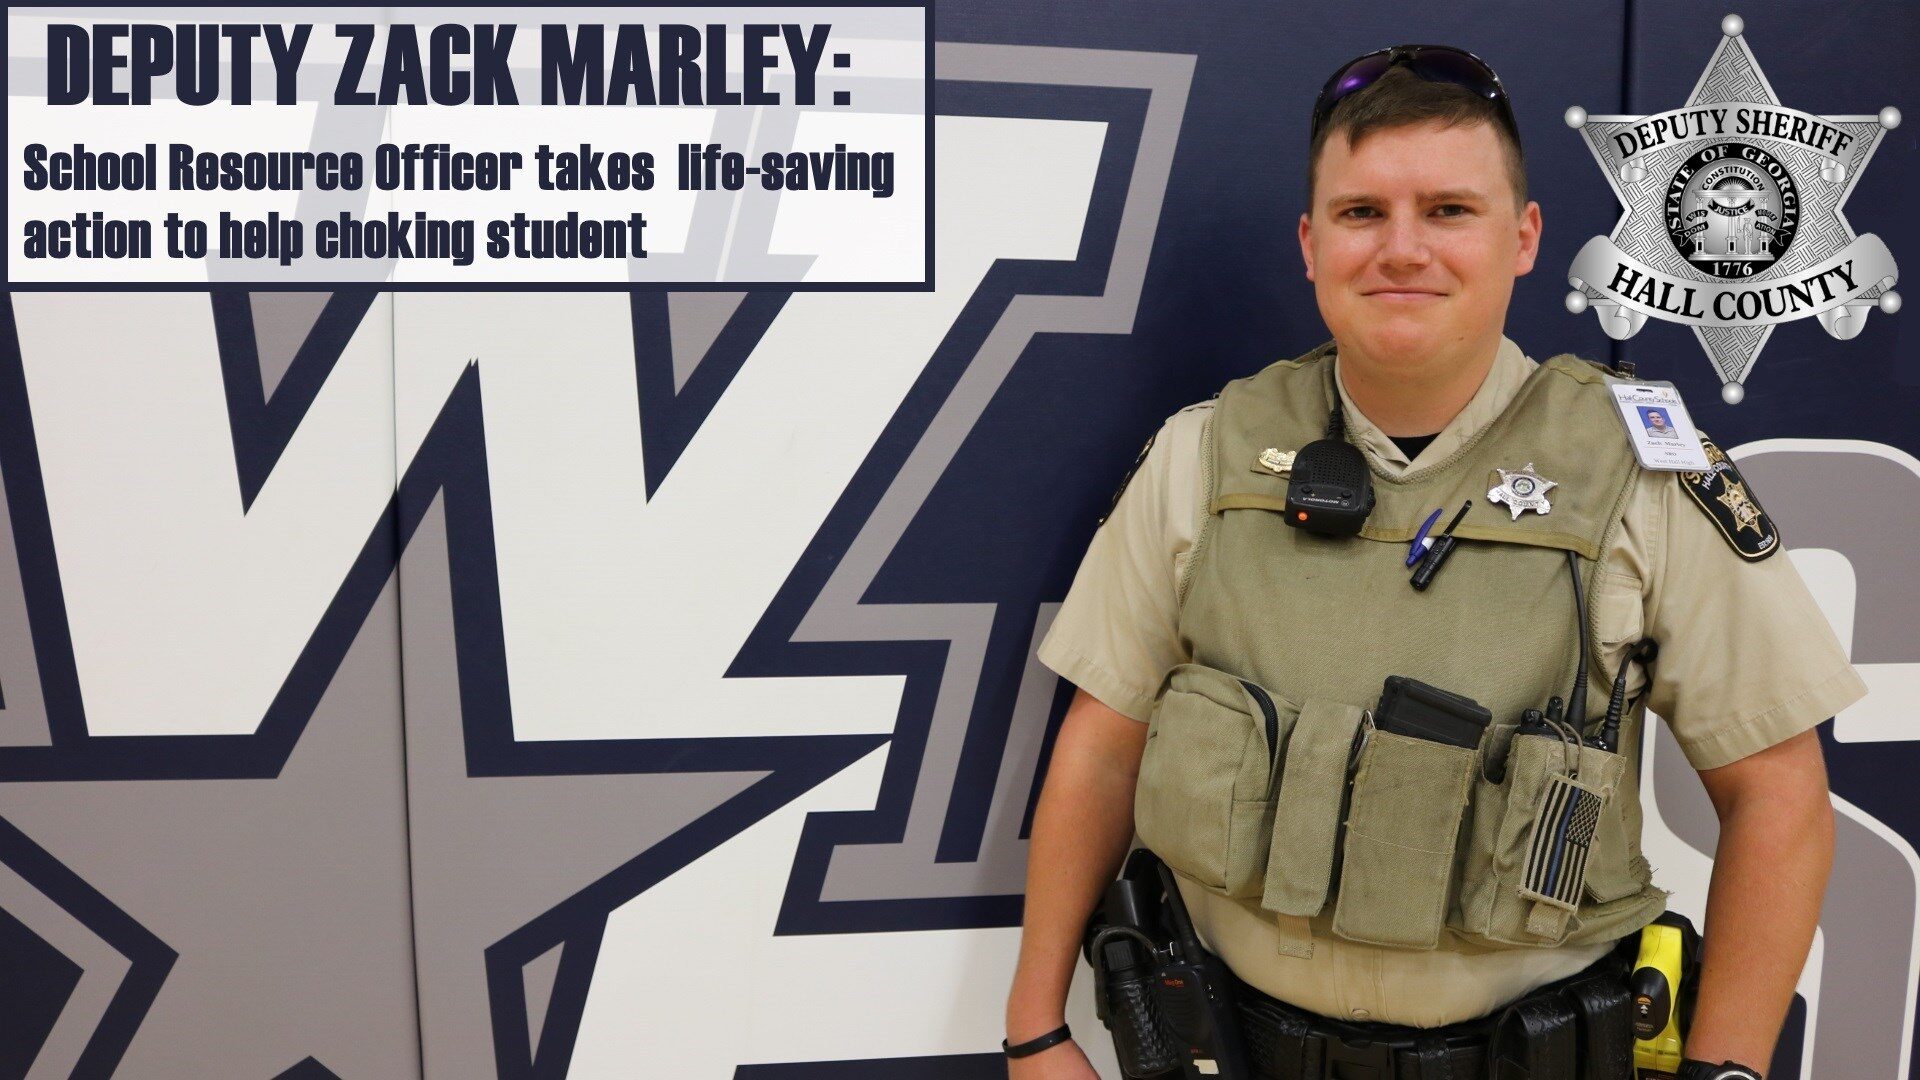 Hall County school resource officer saves student from choking